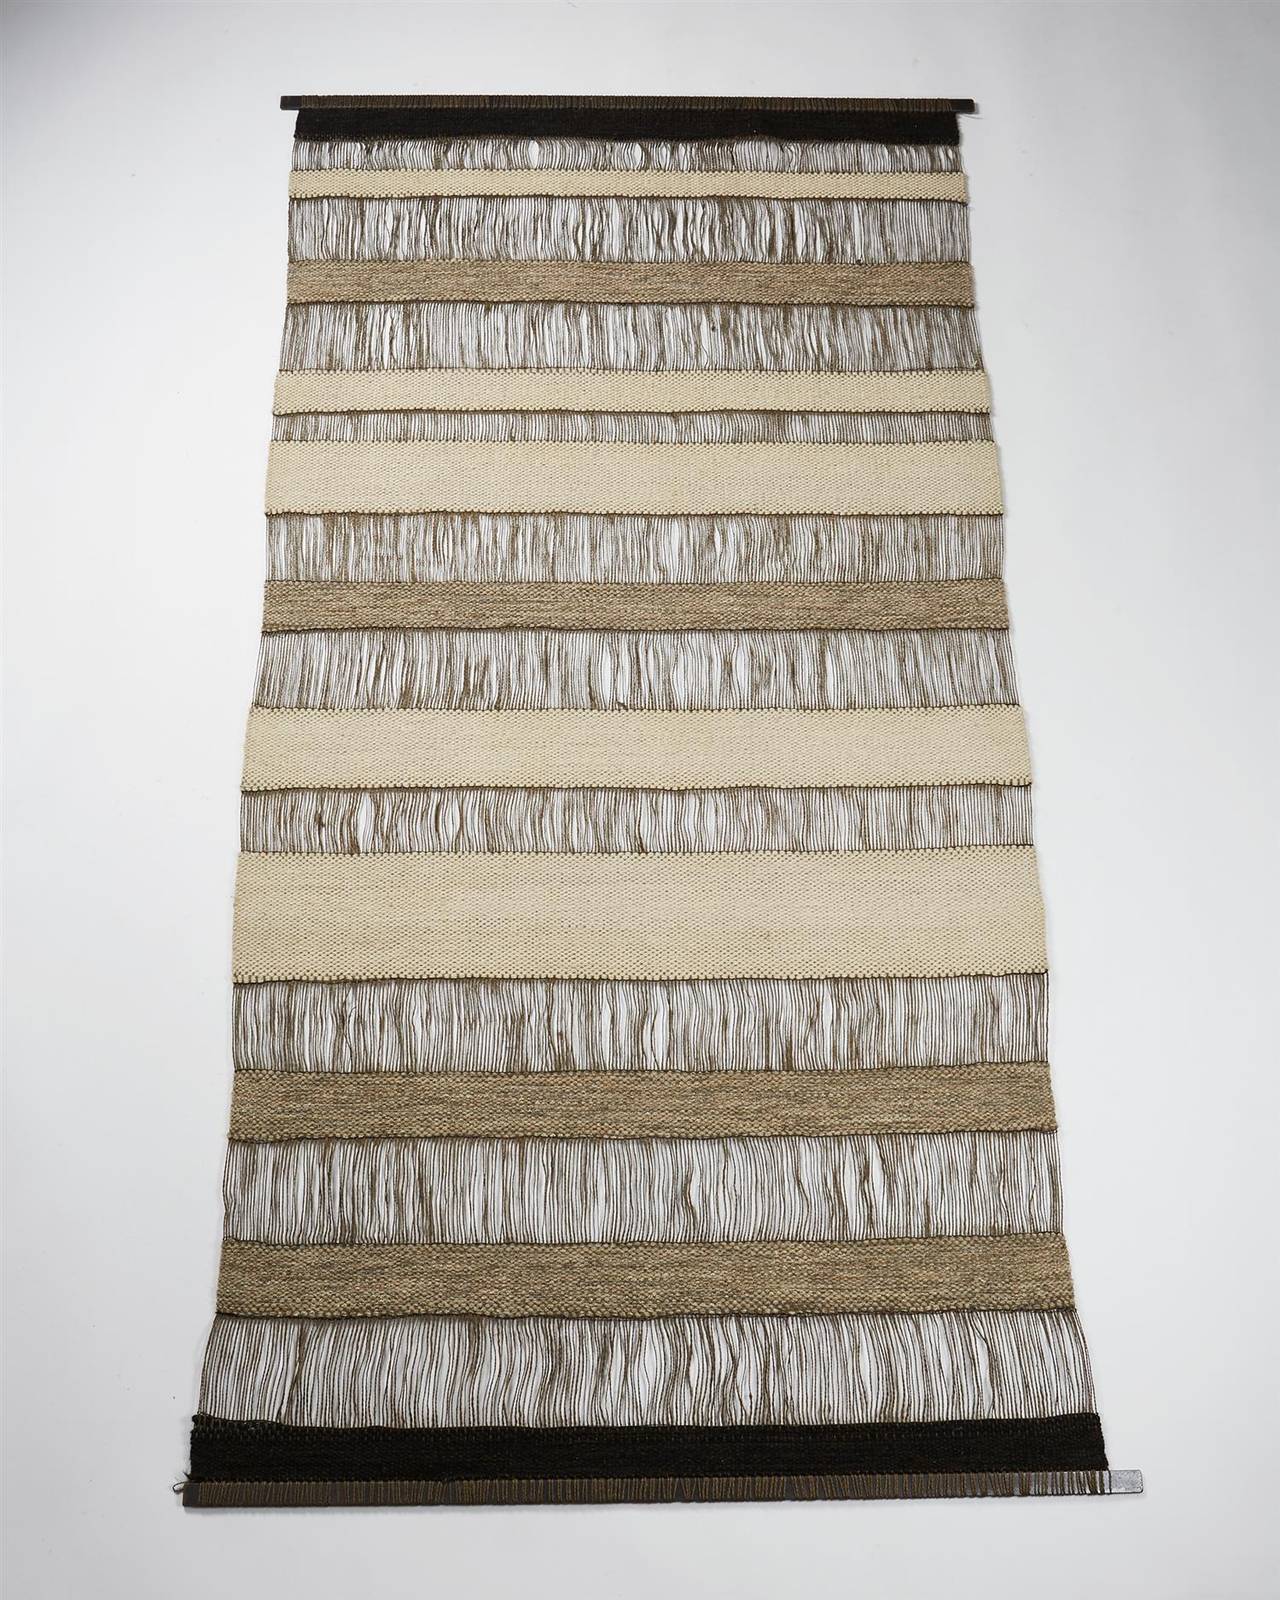 Textile wall hanging by Jette Nevers, Denmark. 1970s.
Handwoven linen.